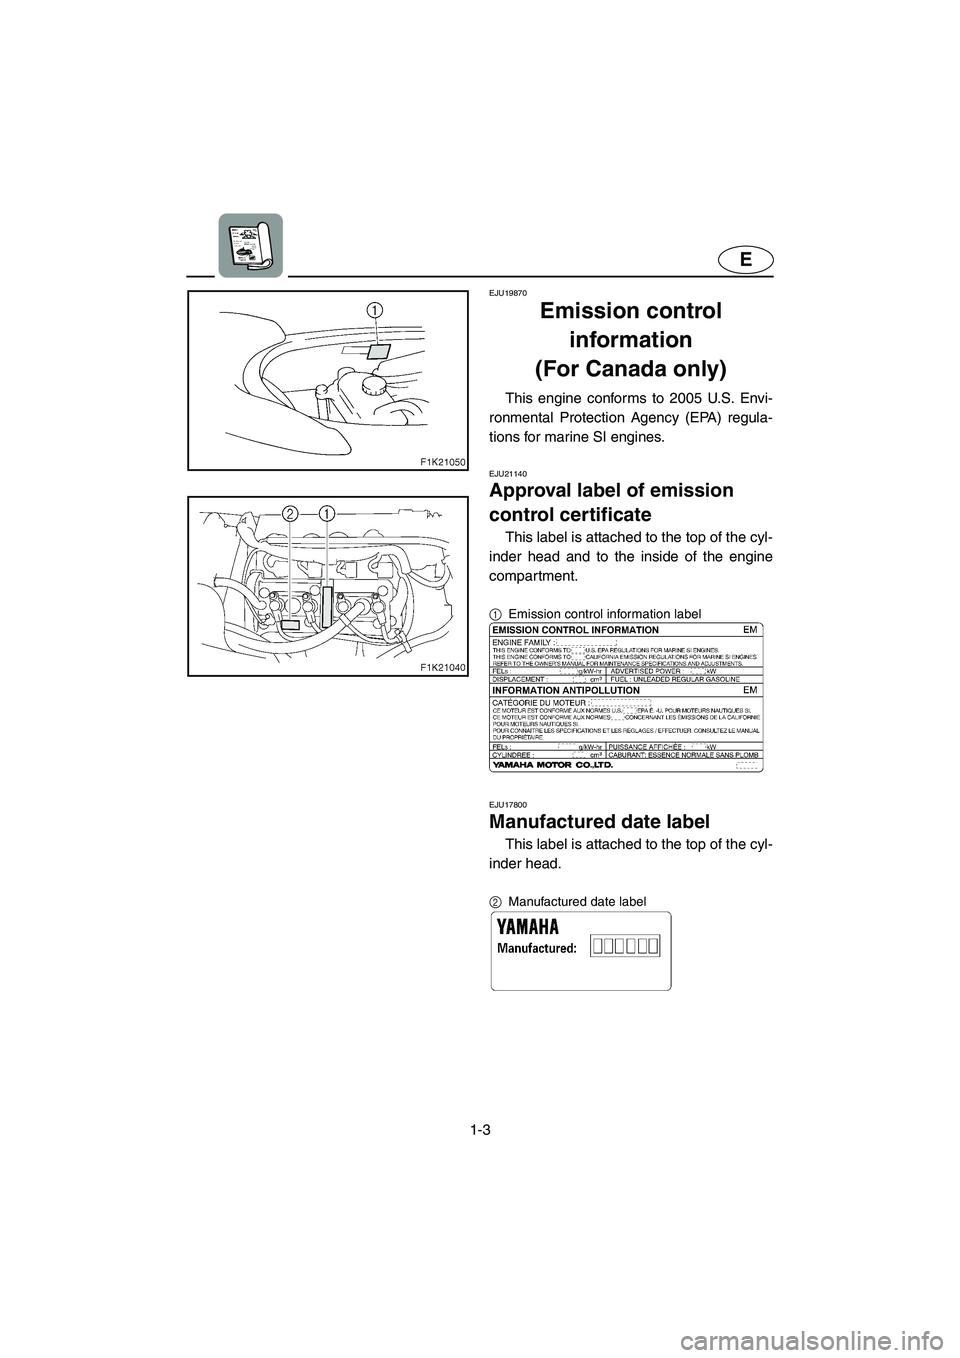 YAMAHA VX 2005  Owners Manual 1-3
E
EJU19870
Emission control 
information 
(For Canada only) 
This engine conforms to 2005 U.S. Envi-
ronmental Protection Agency (EPA) regula-
tions for marine SI engines. 
EJU21140  
Approval lab